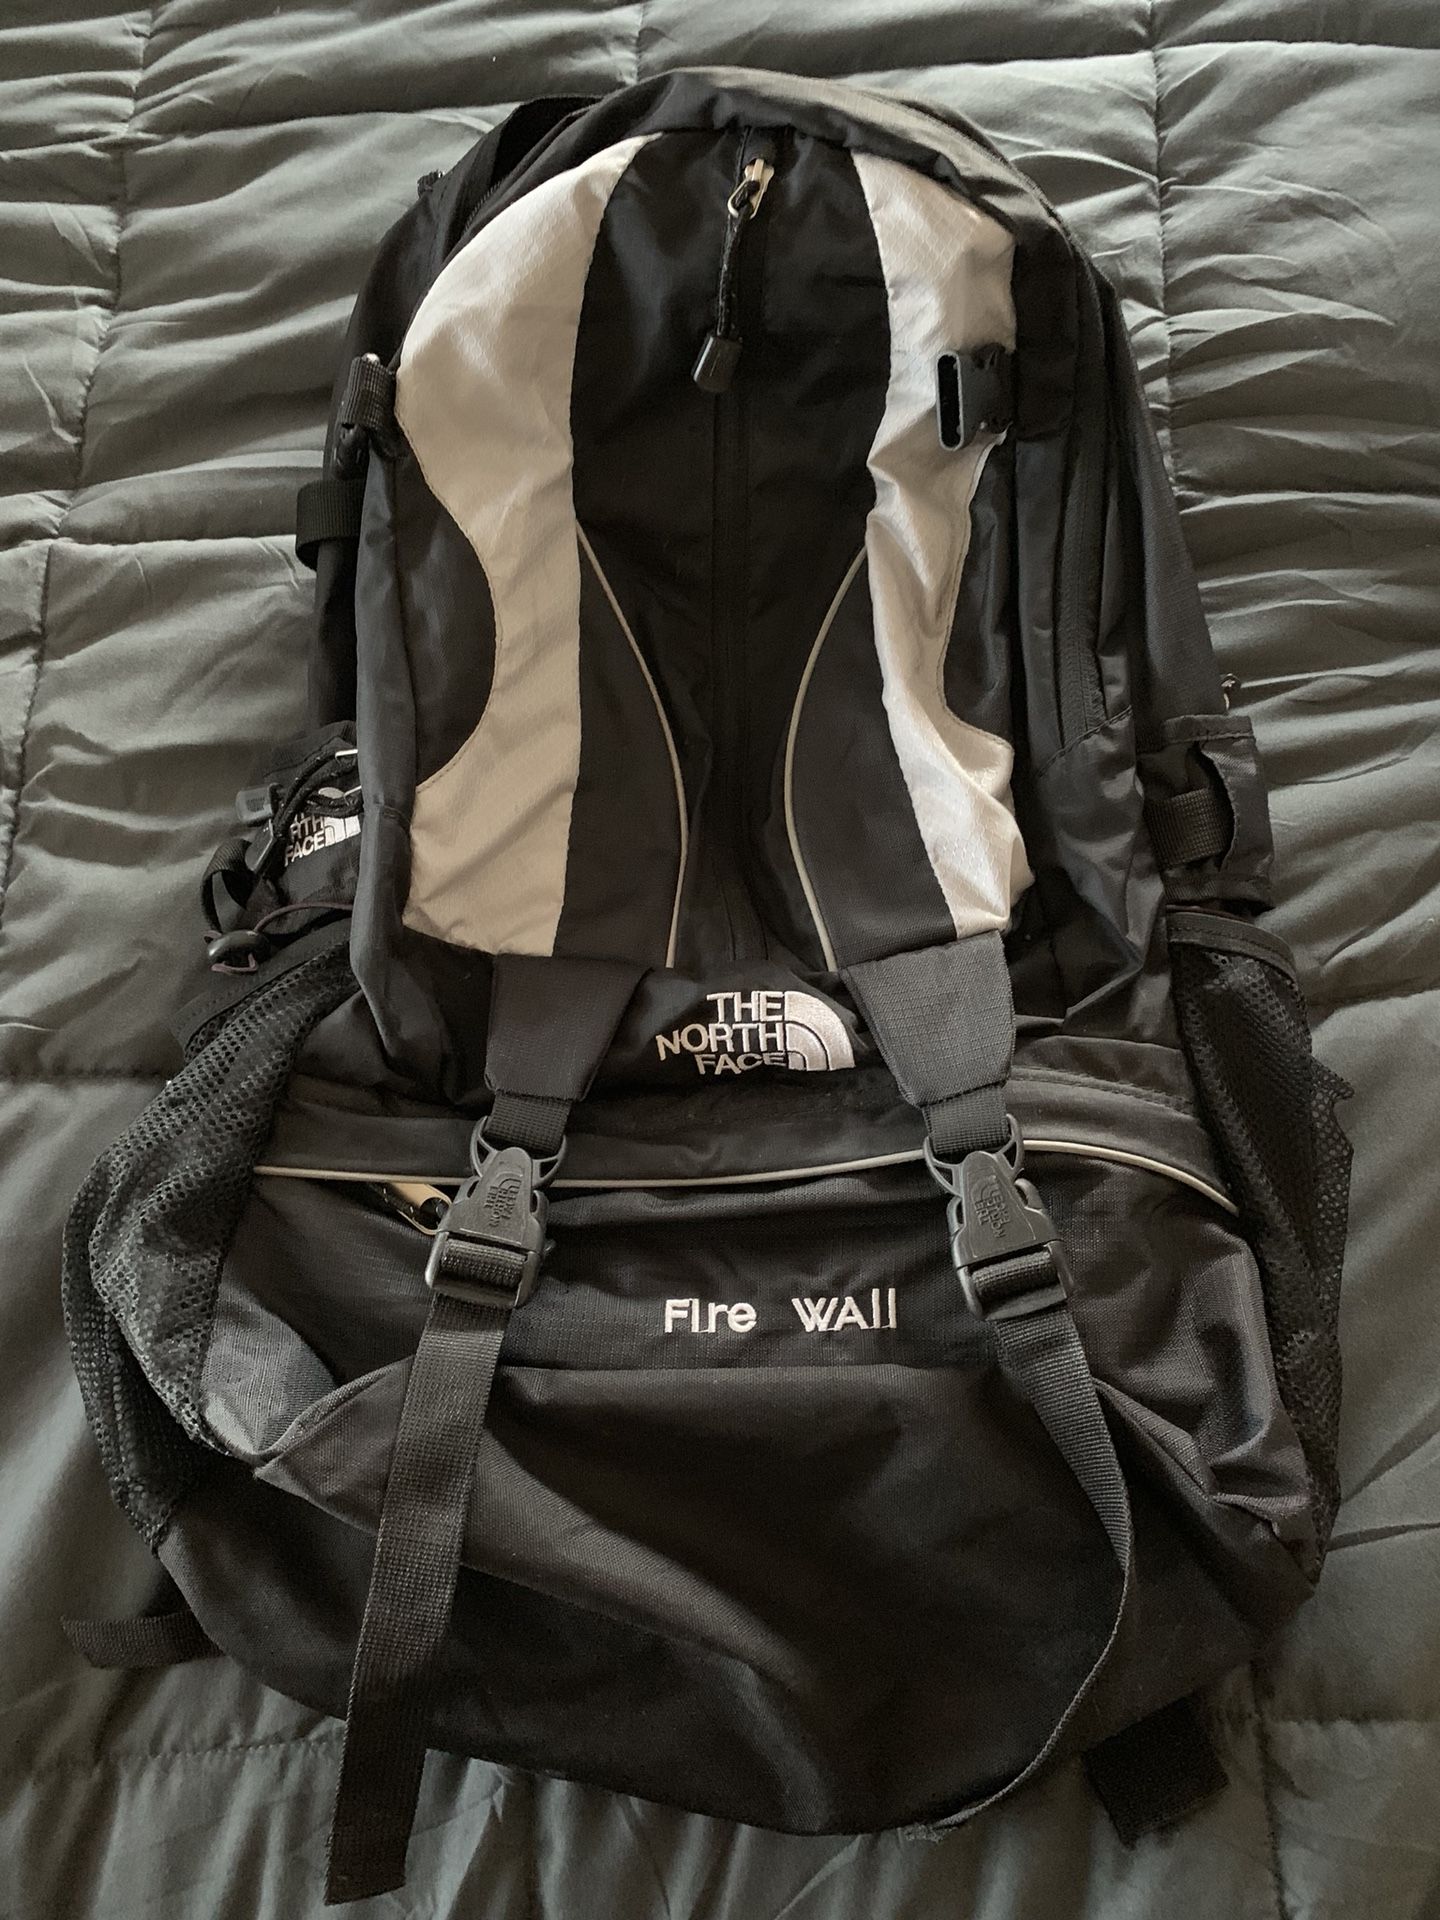 The North Face Travel backpack